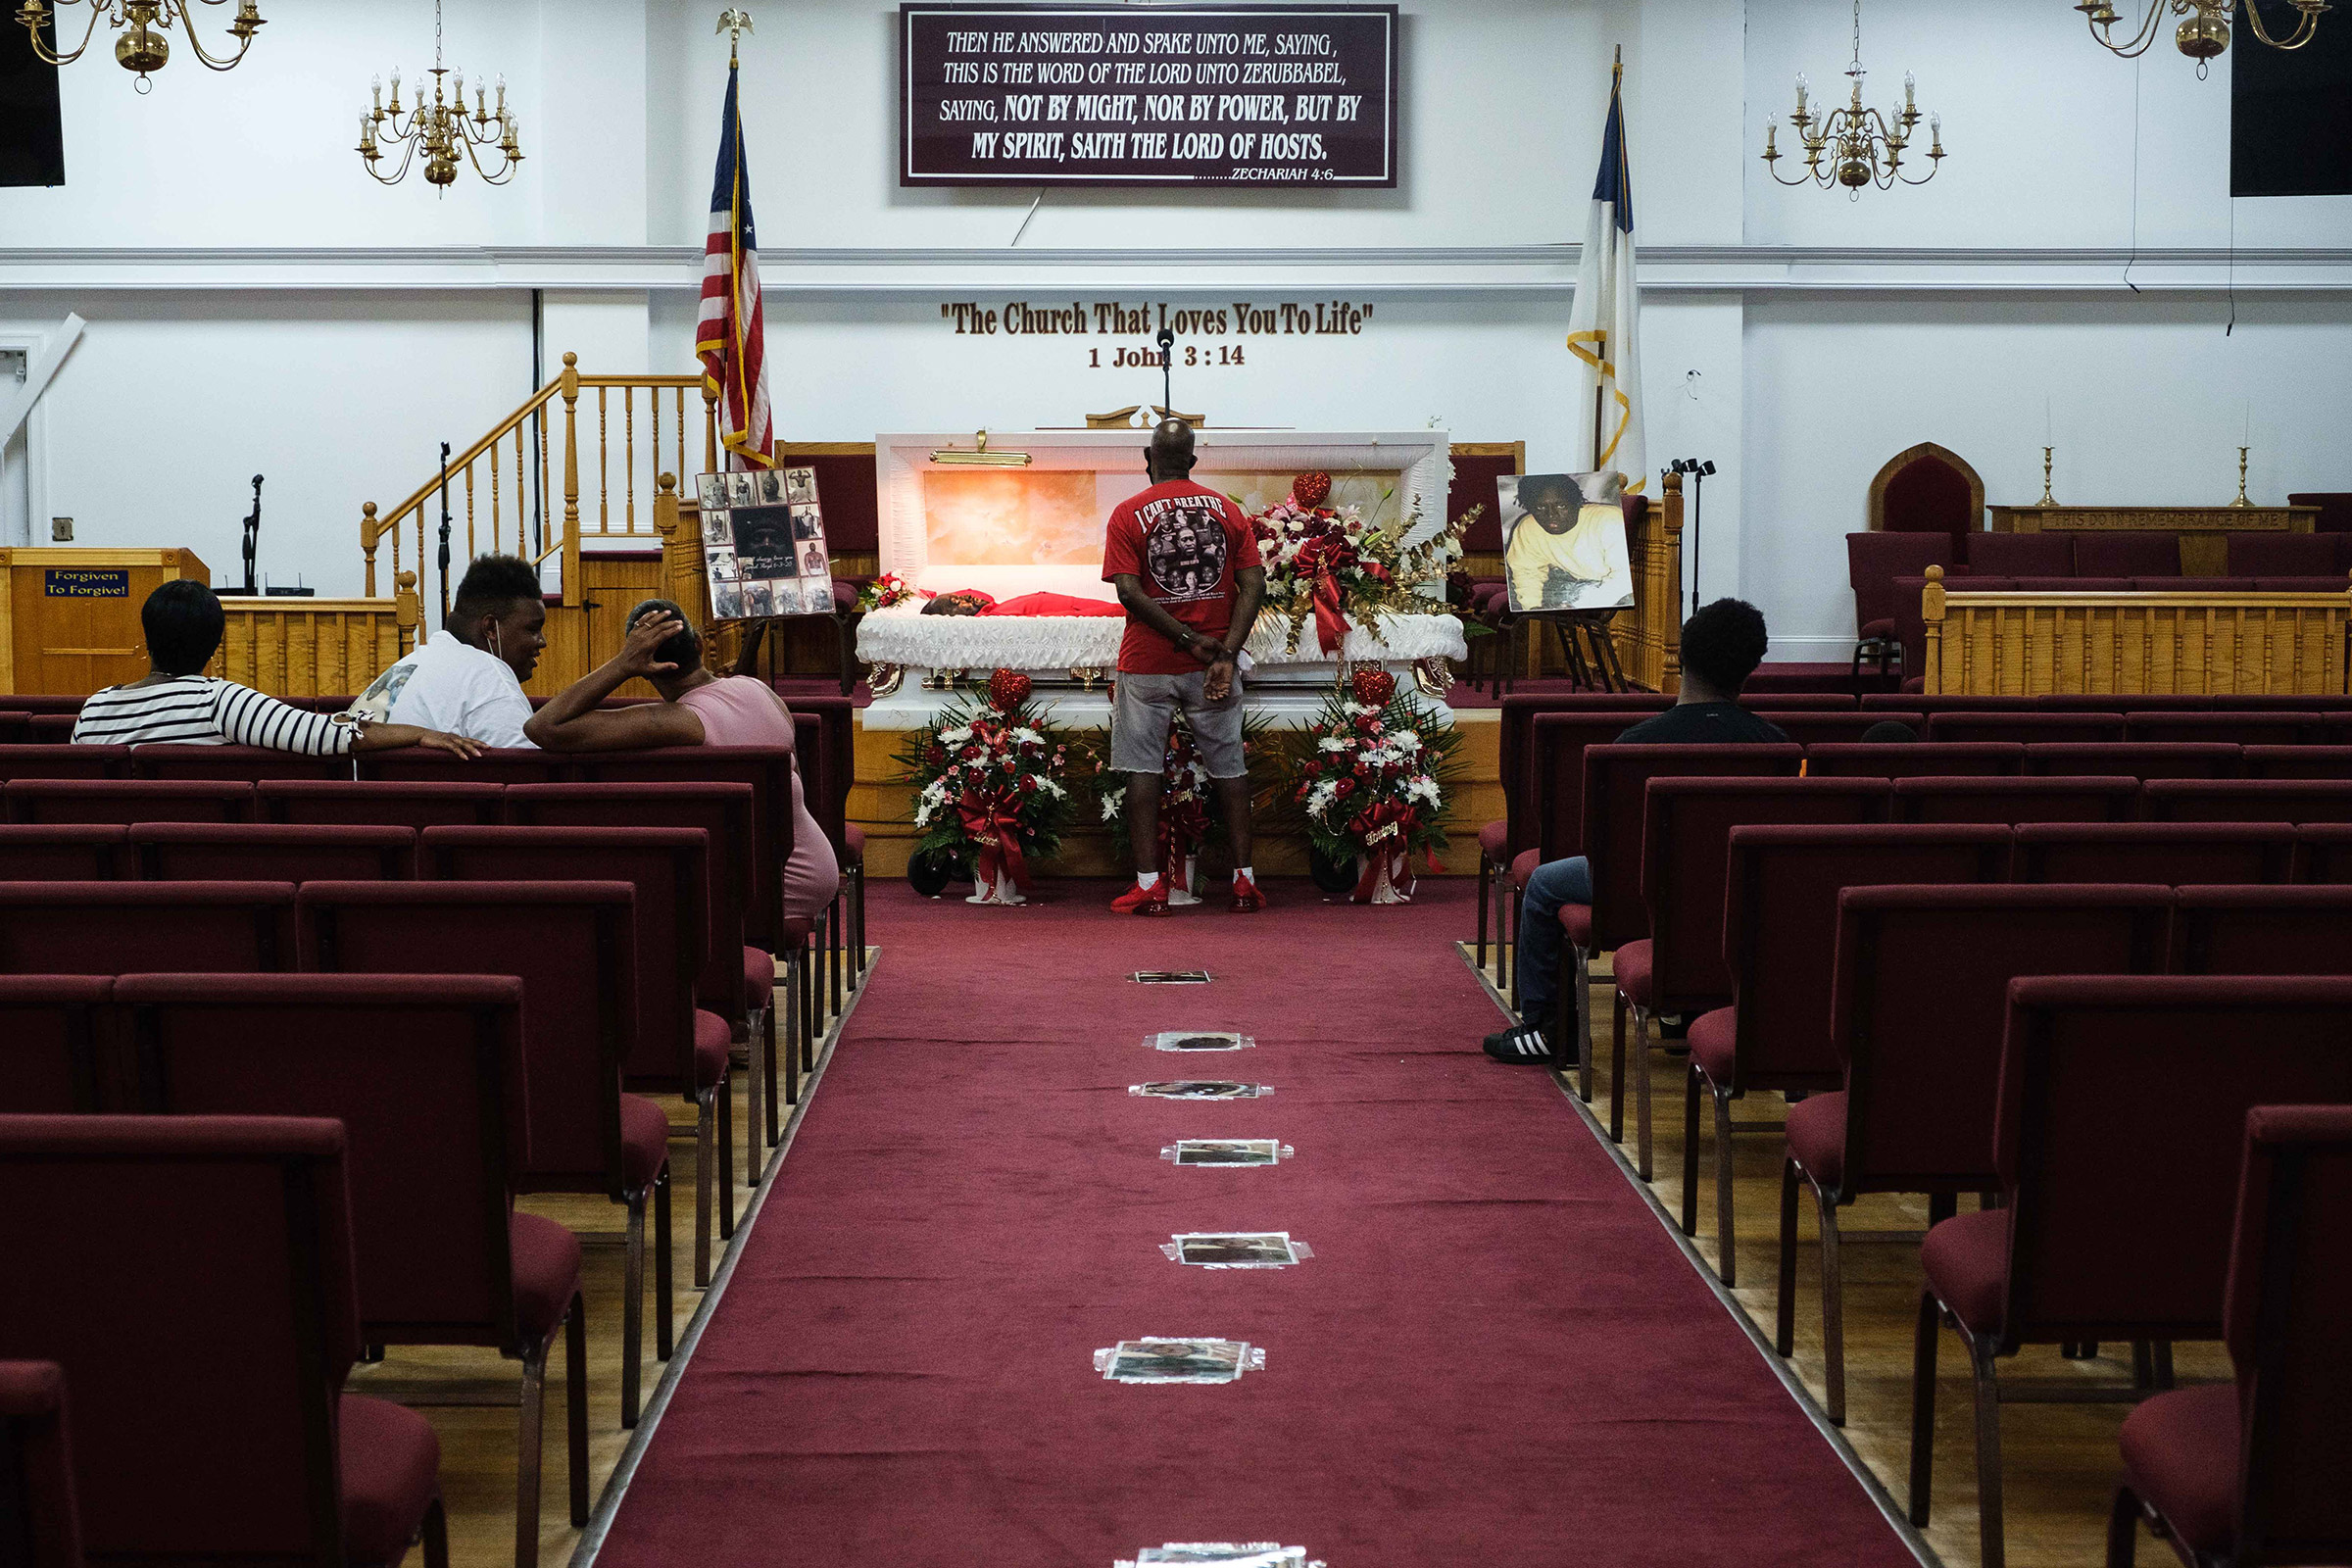 James Floyd, Jamel Floyd’s father, looks over his son's body during the wake at Judea United Baptist Church in Hempstead, N.Y., on June 29.